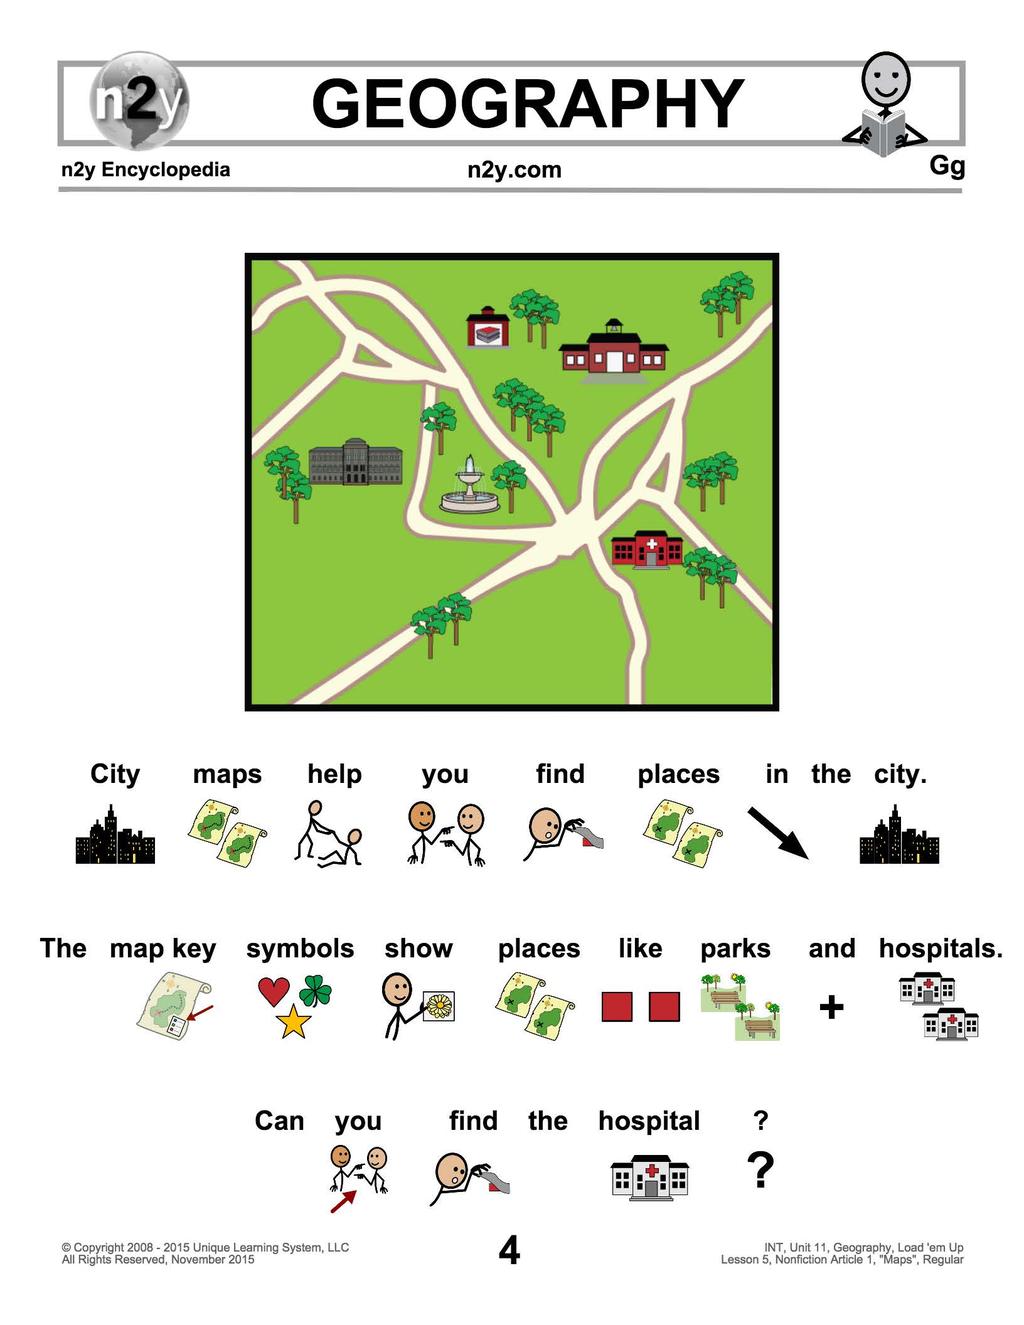 ... City maps help you find places in the city.... ' The map key symbols show places like parks u" - = + and hospitals.